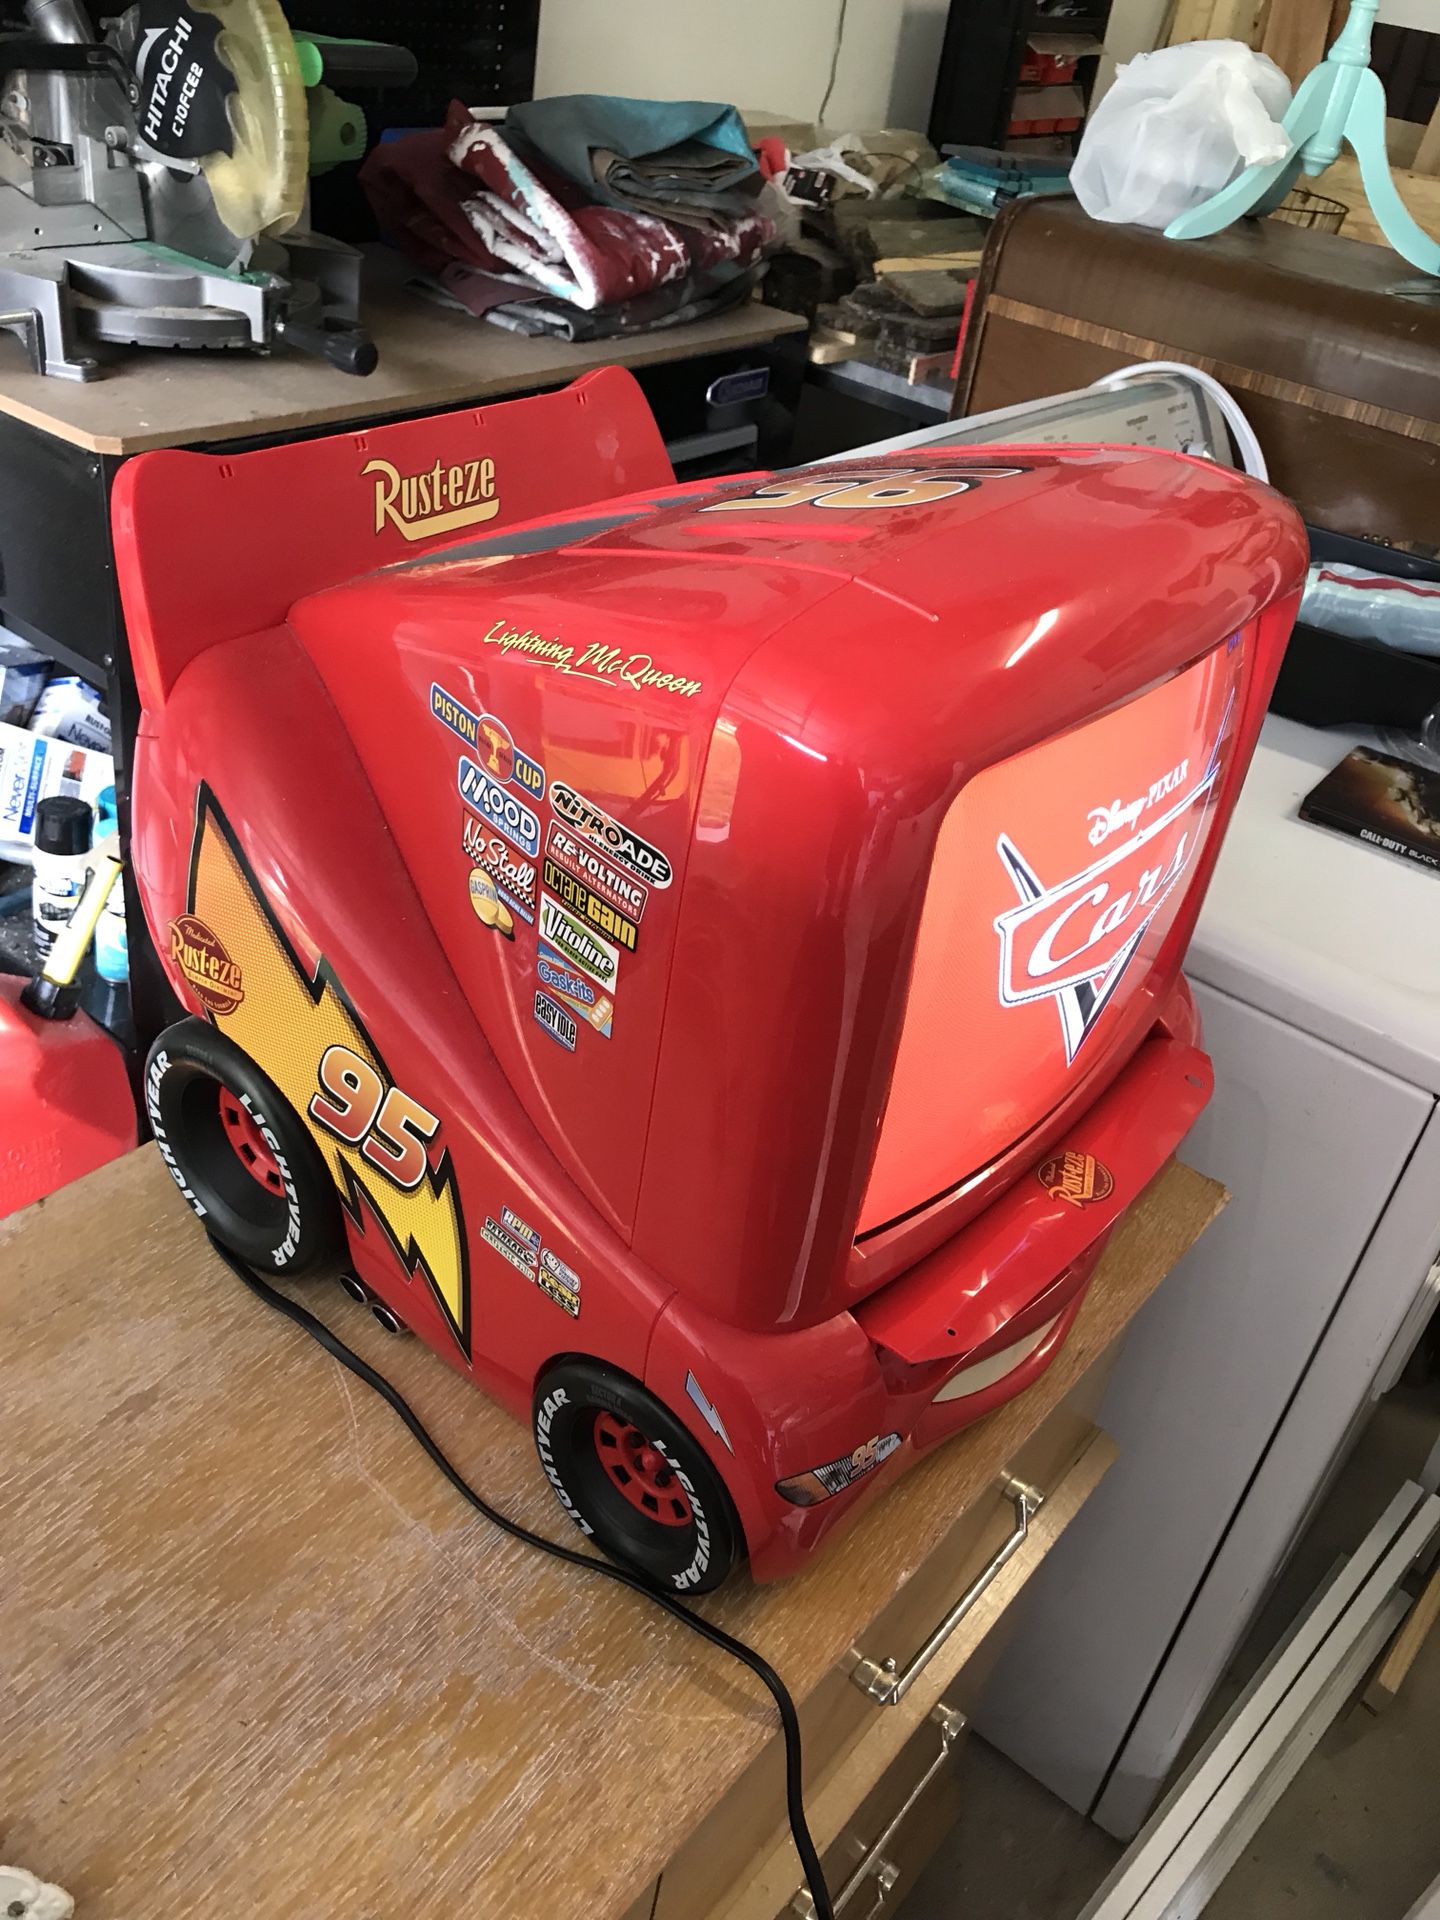 Disney Pixar cars lightning McQueen 13 “ TV/DVD combo television and remote